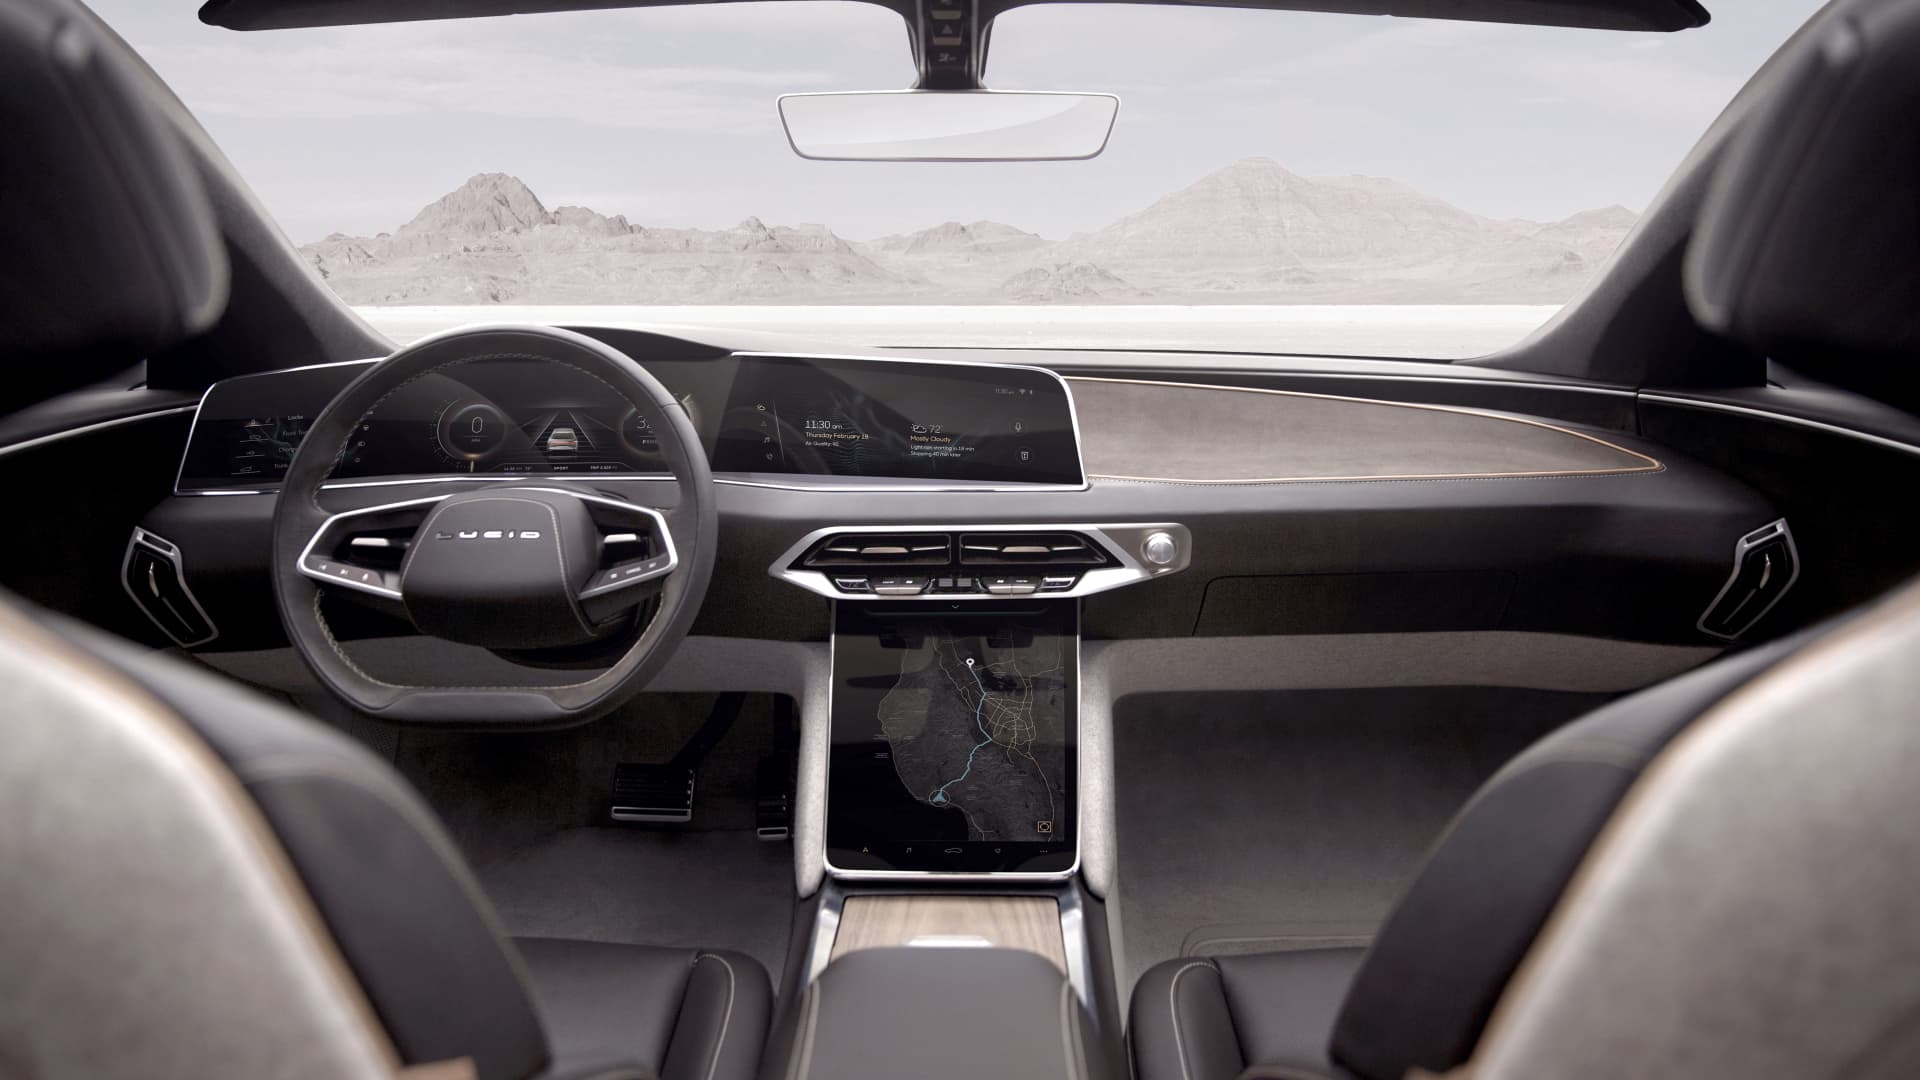 Interior of the Lucid Air show car, which is expected to be produced beginning in 2021.